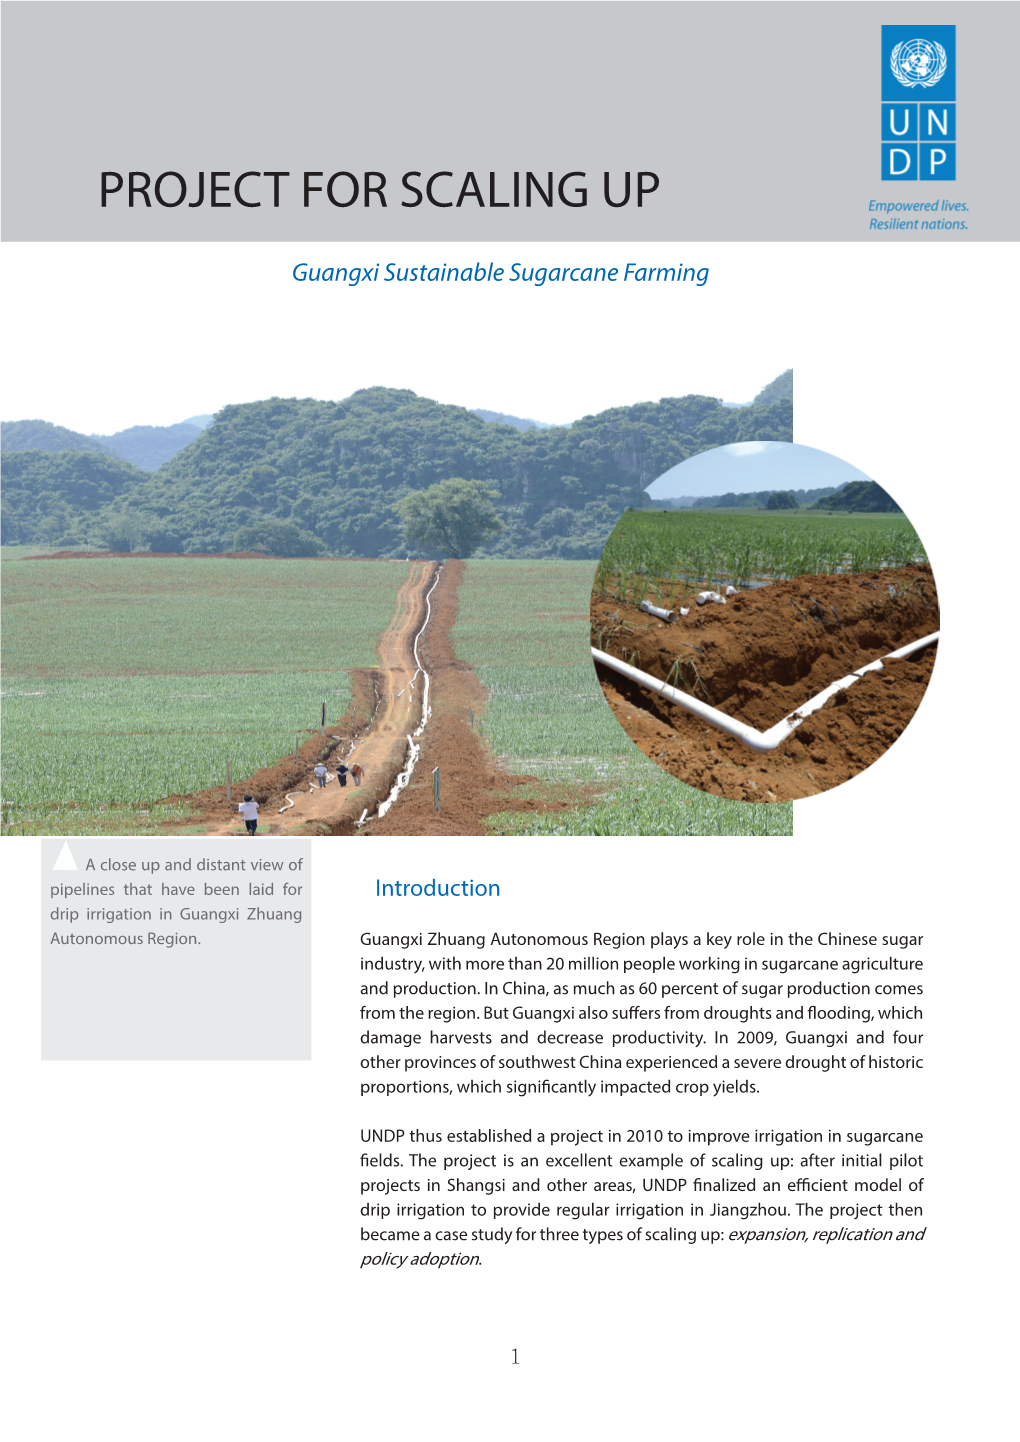 Sustainable Sugarcane Farming in Guangxi Province